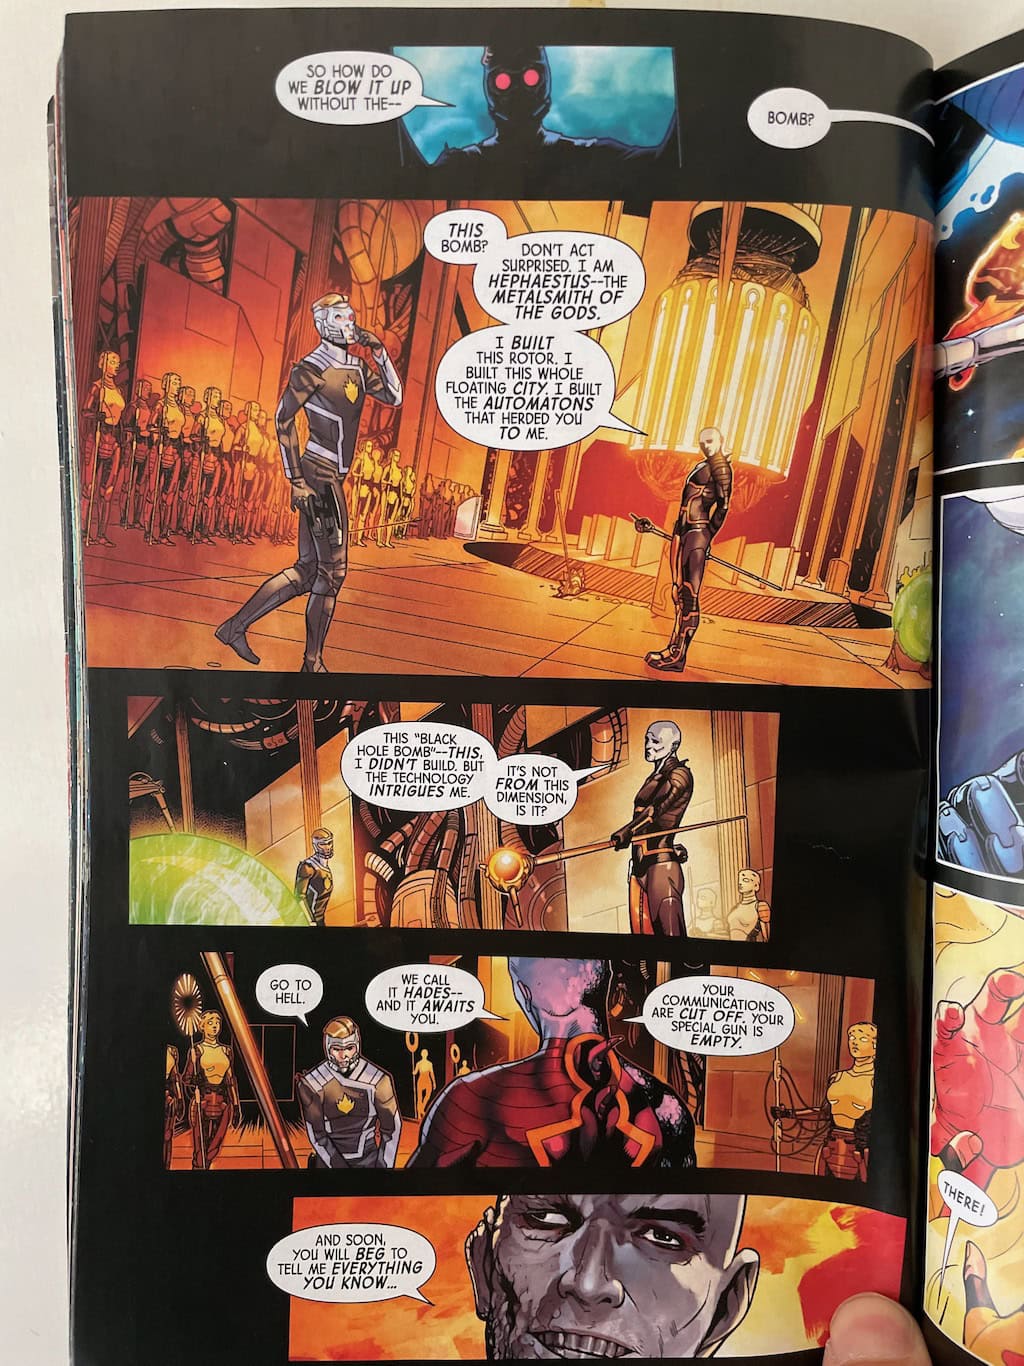 Hades scene in Guardians of the Galaxy Comic